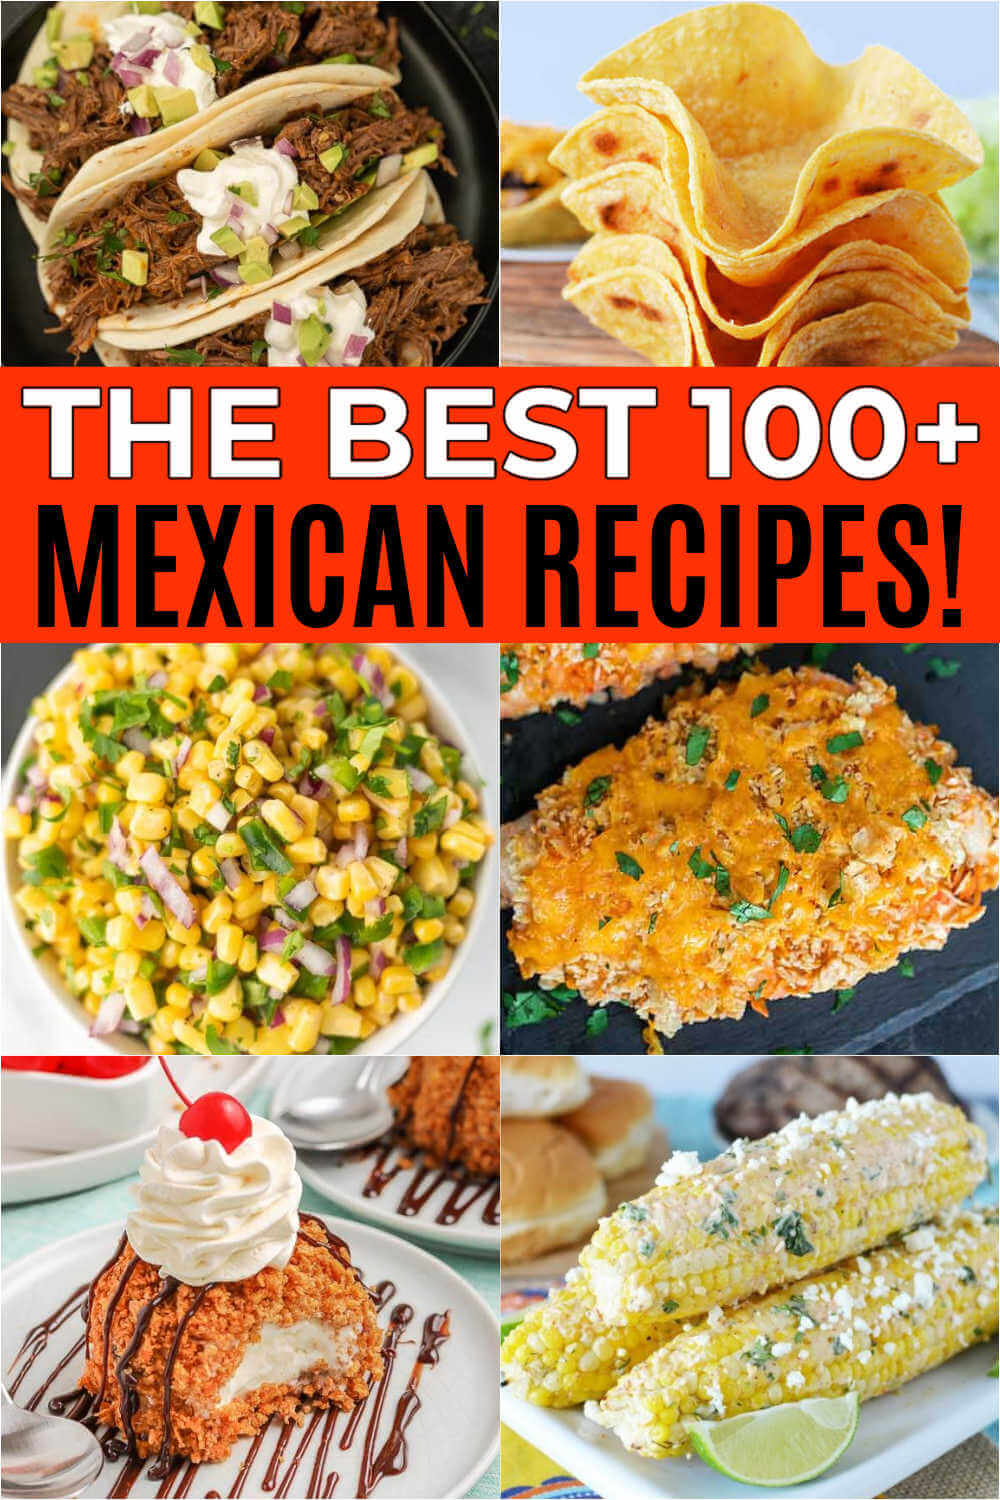 We have the Biggest roundup of over 100 of the BEST Mexican Recipes. Save money by eating in tonight and still satisfying that craving! These are the best authentic Mexican recipes with beef and chicken that are easy to make too! #eatingonadime #mexicanrecipes #easyrecipes 
